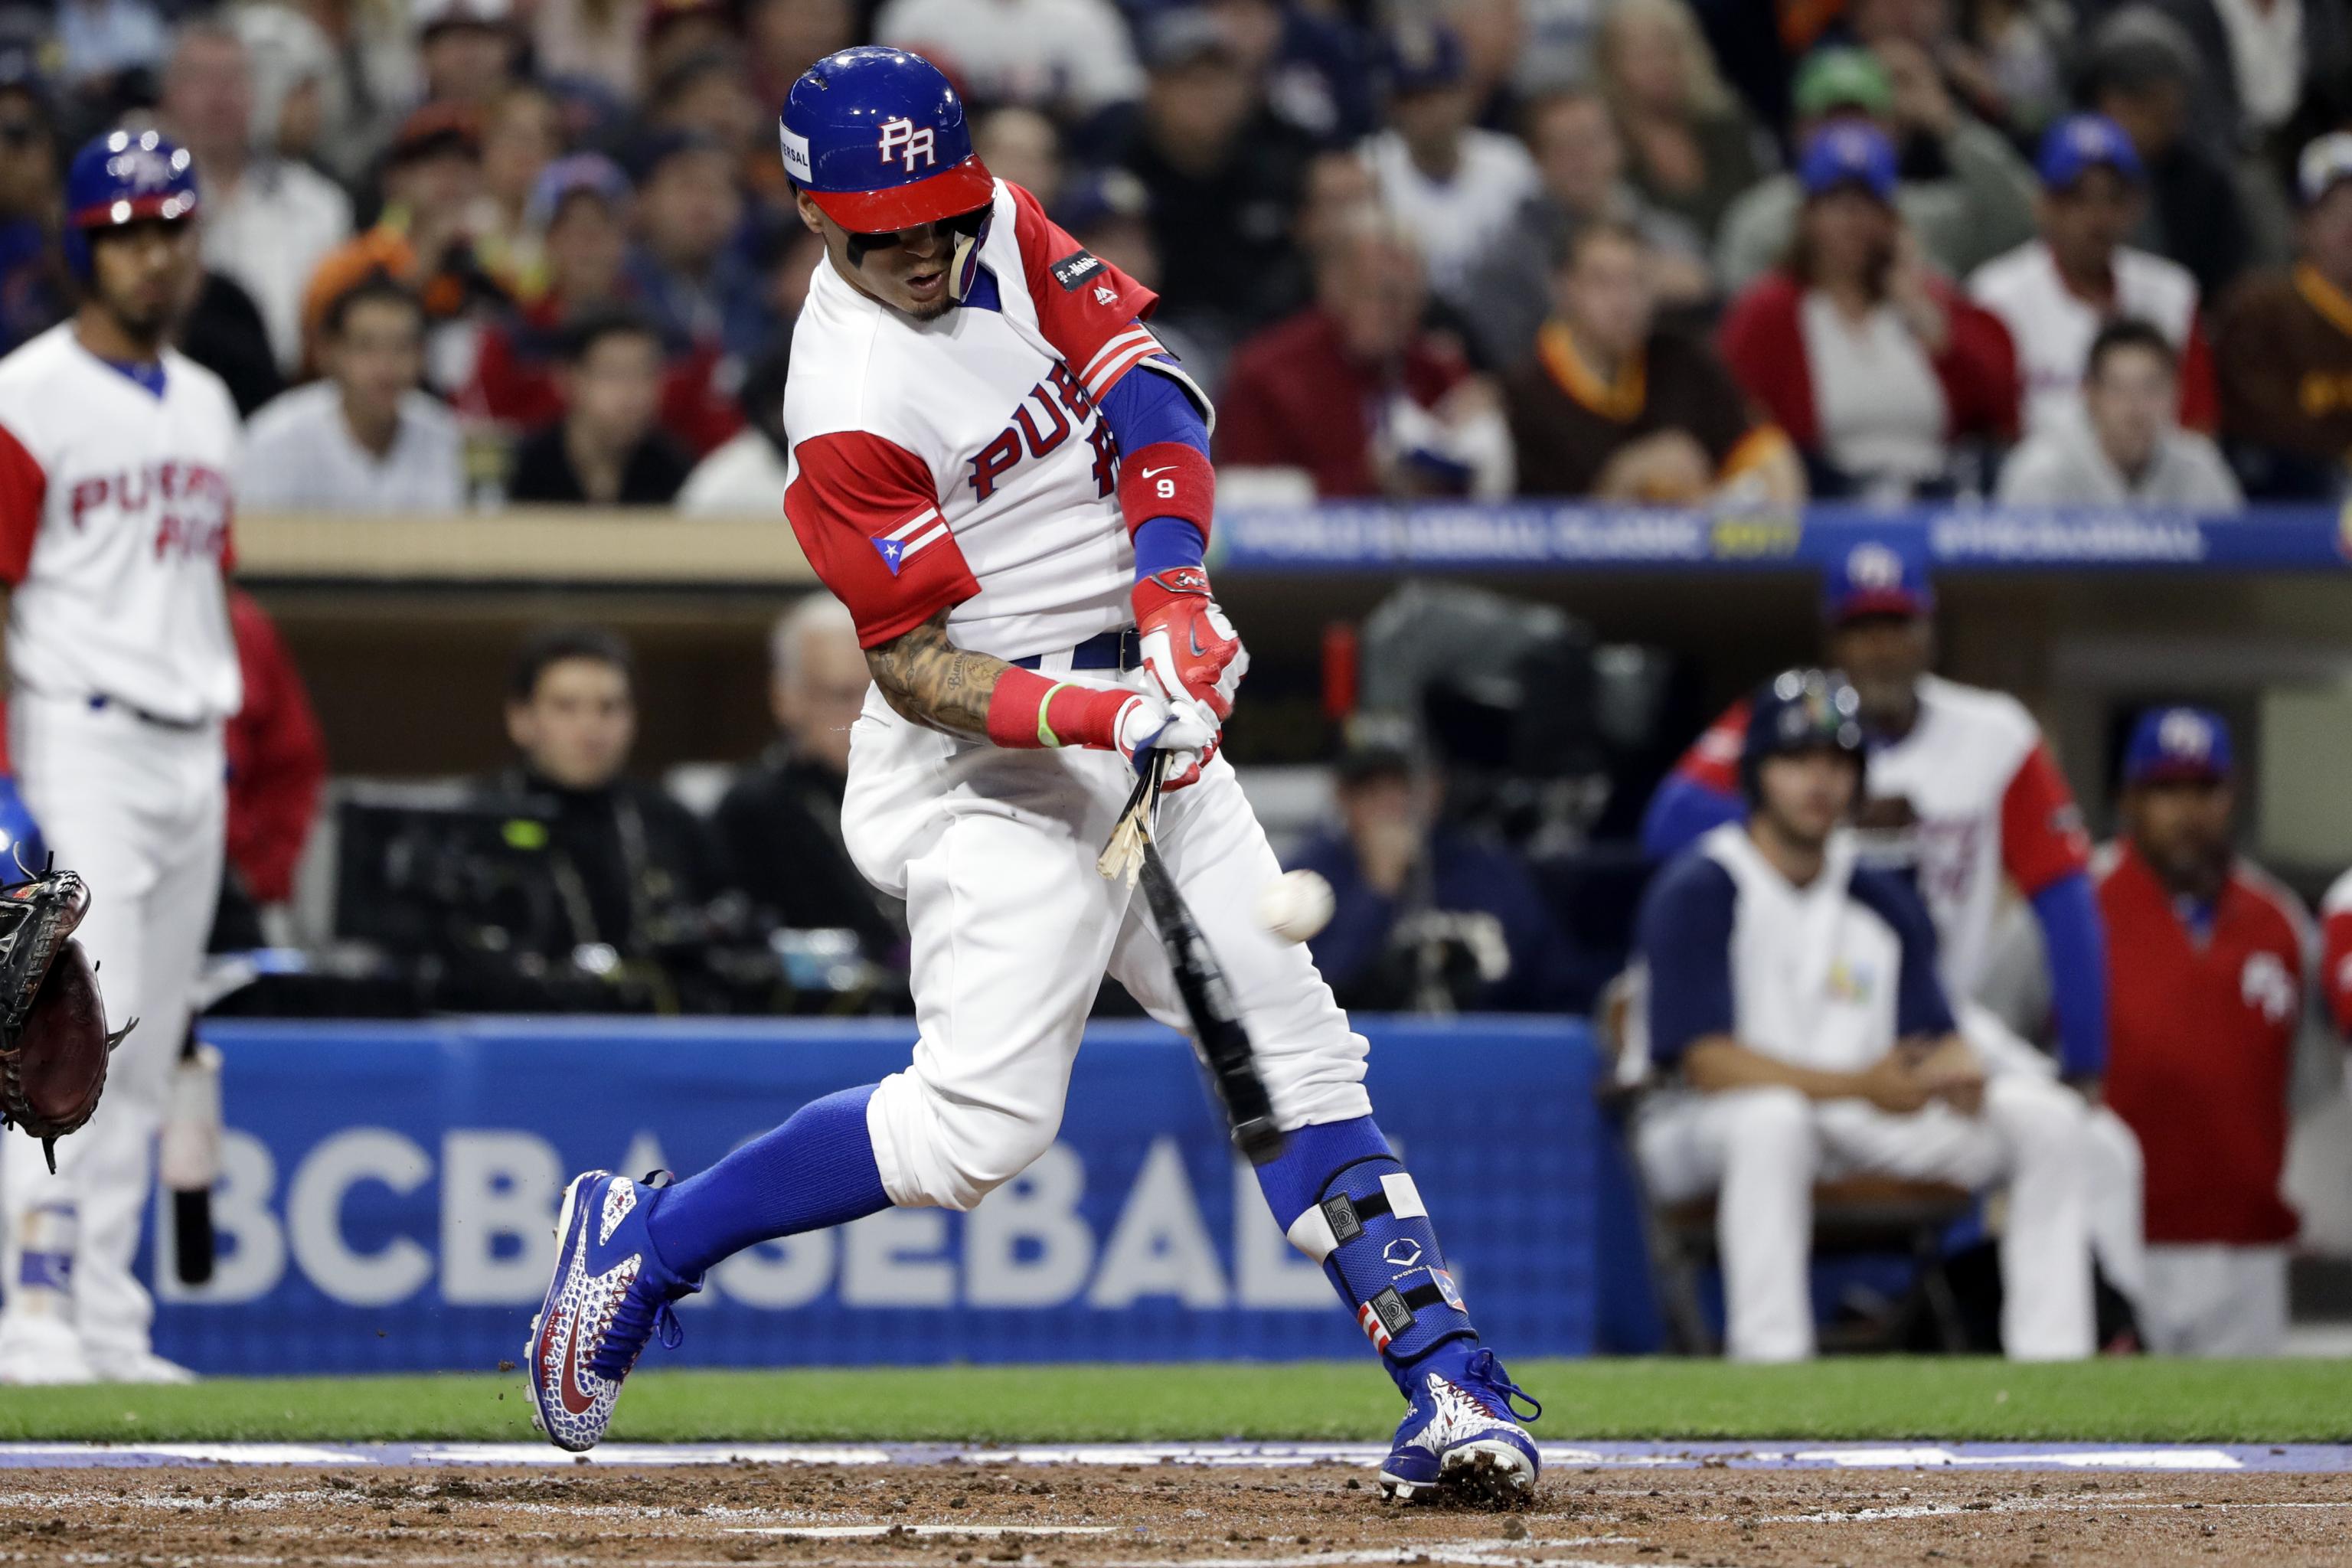 United States Beats Puerto Rico for First World Baseball Classic